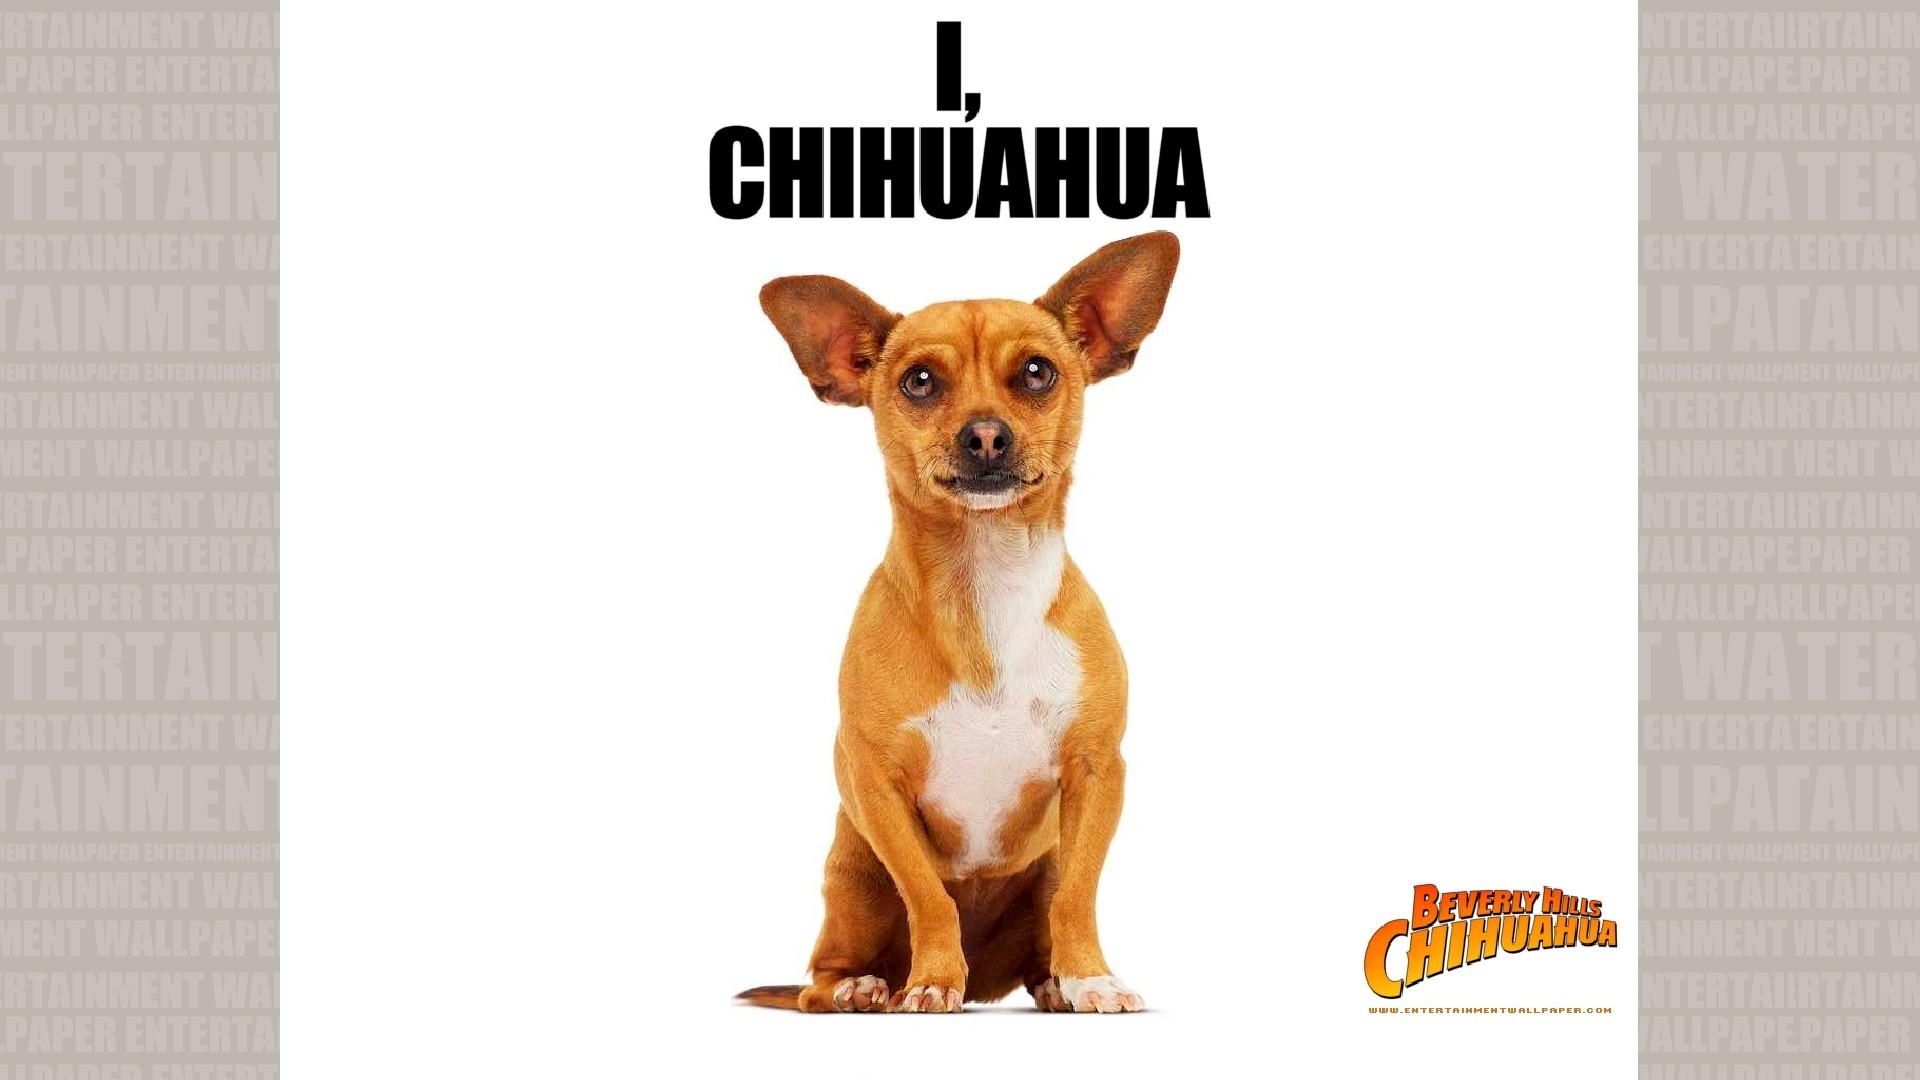 1920x1080 Beverly Hills Chihuahua Wallpaper - Original size, download now.